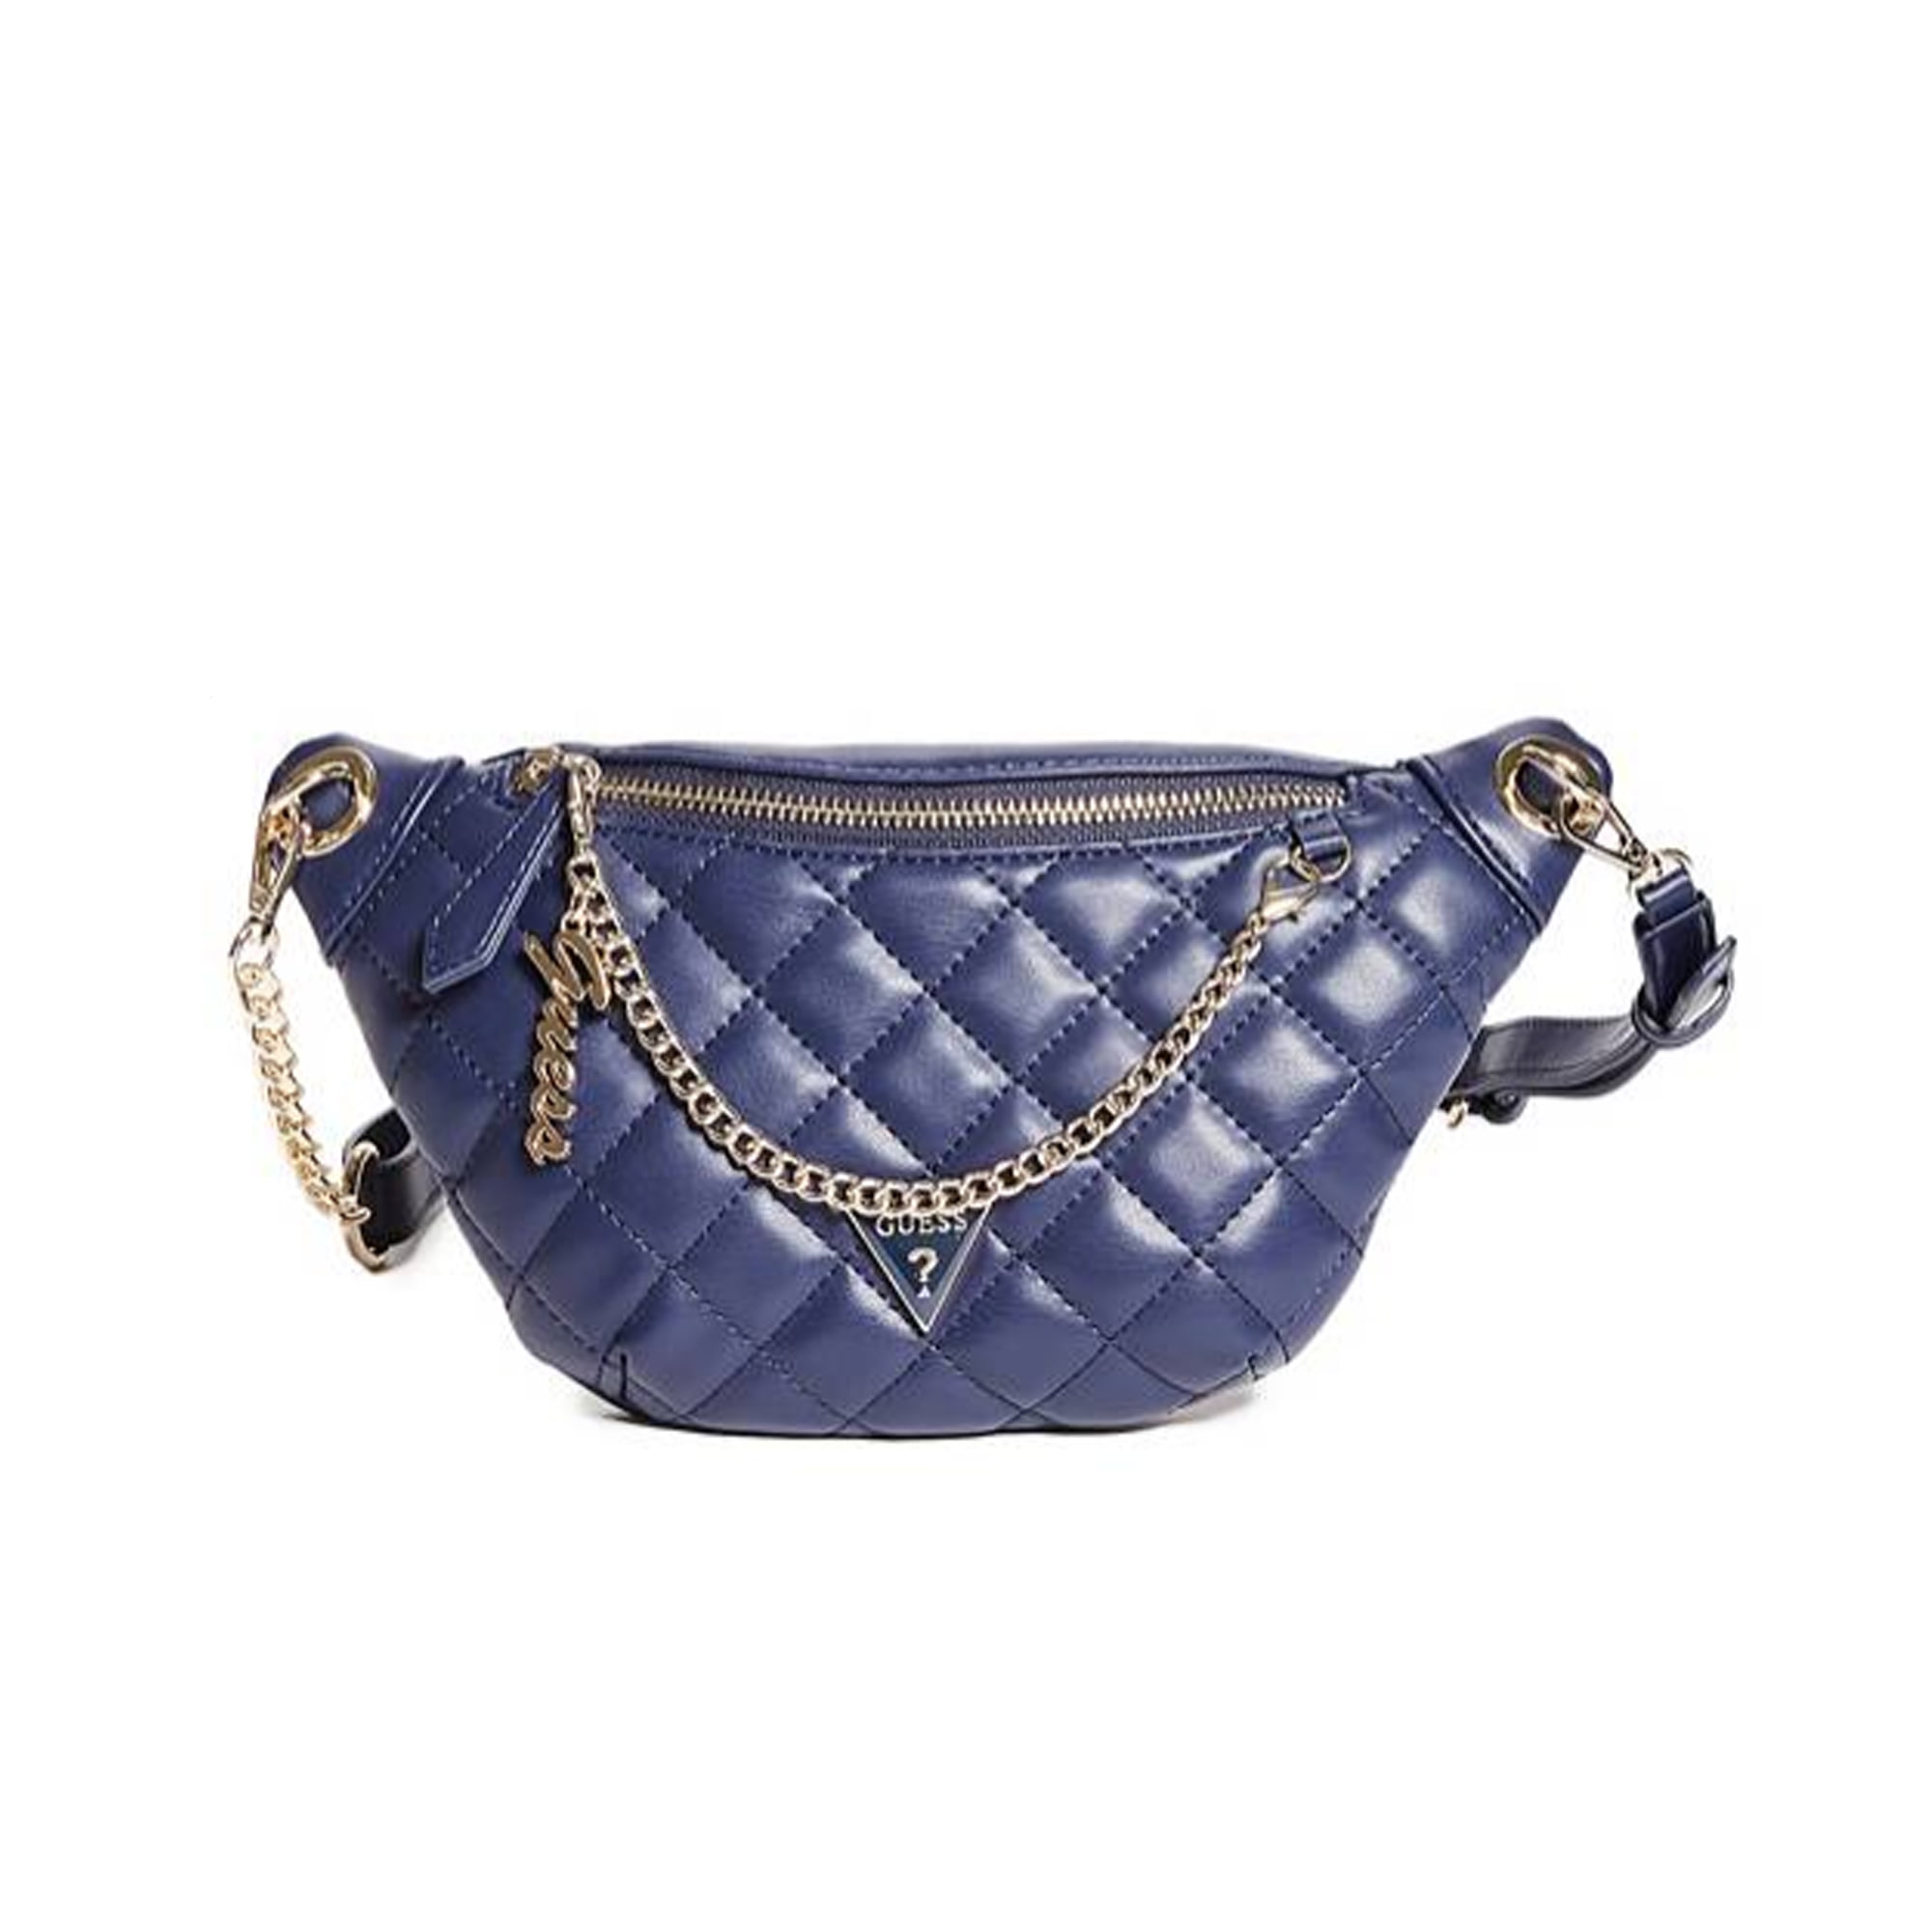 Convertible Fanny Pack by Guess Walmart.com